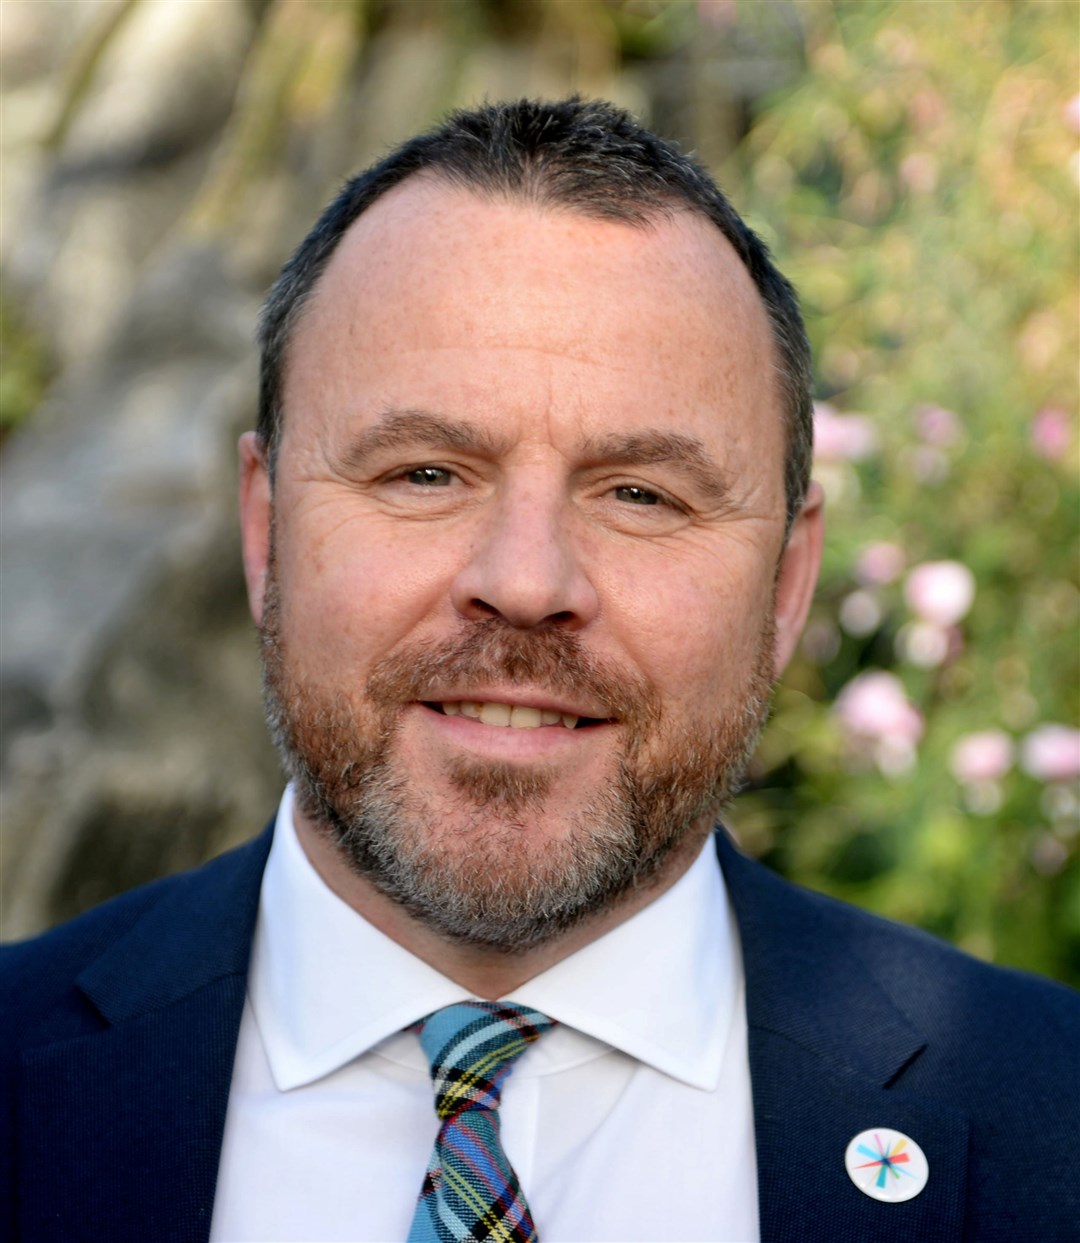 Steve Walsh, chief executive of High Life Highland, has highlighted importance of role in connecting young people to decision-makers.